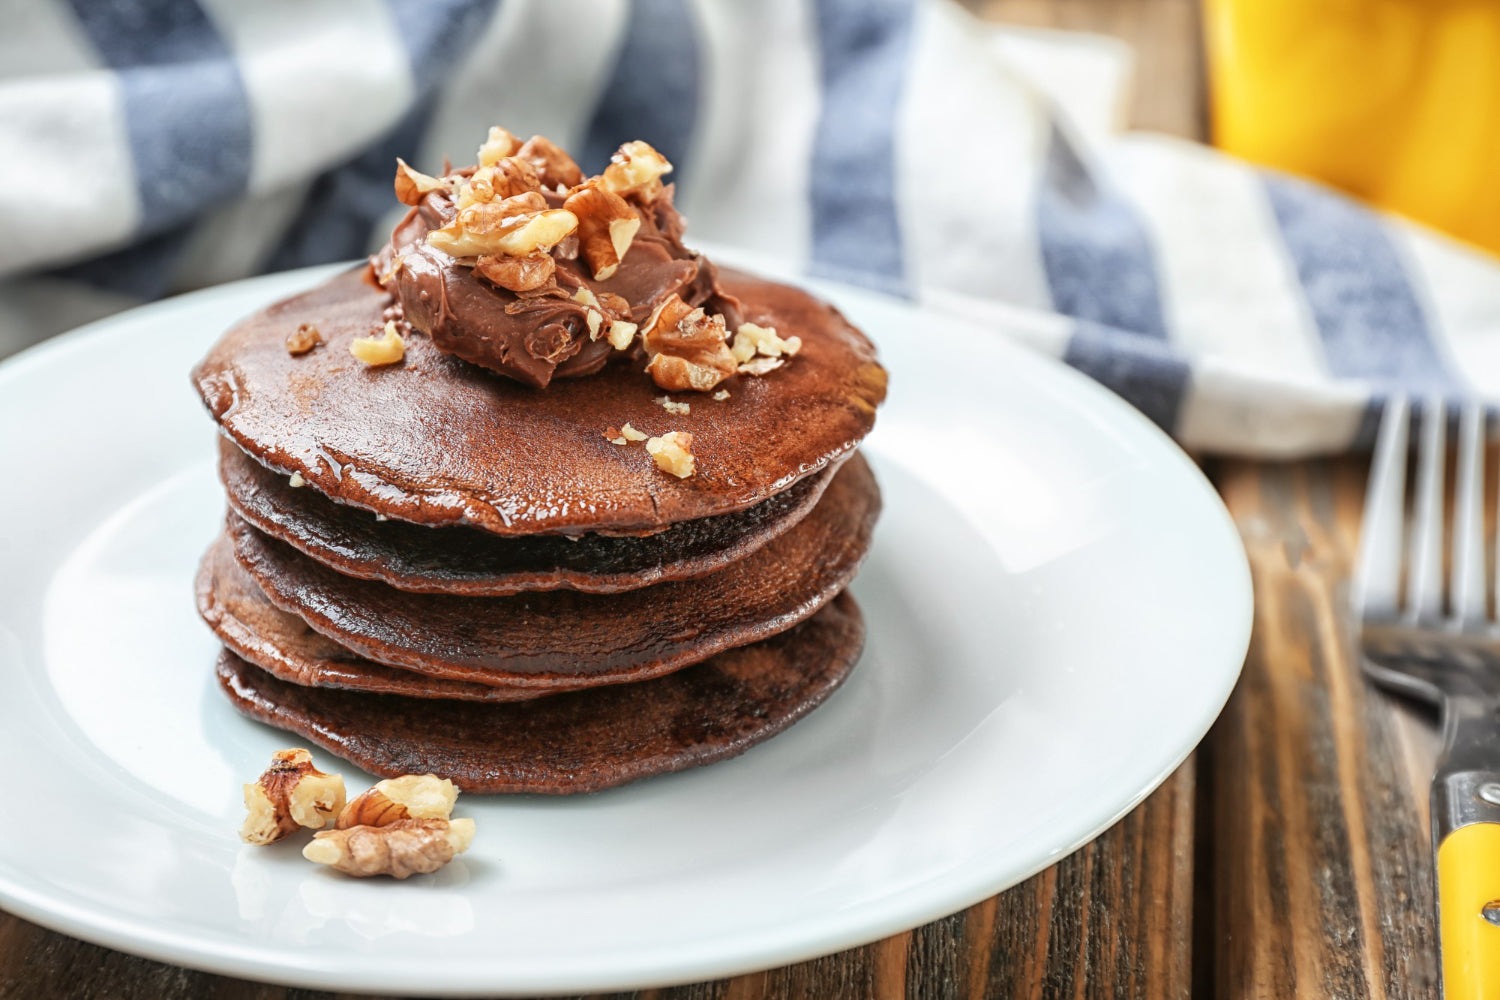 Healthy and Gluten-Free: Buckwheat Pancakes for a Nutritious Start to Your Day